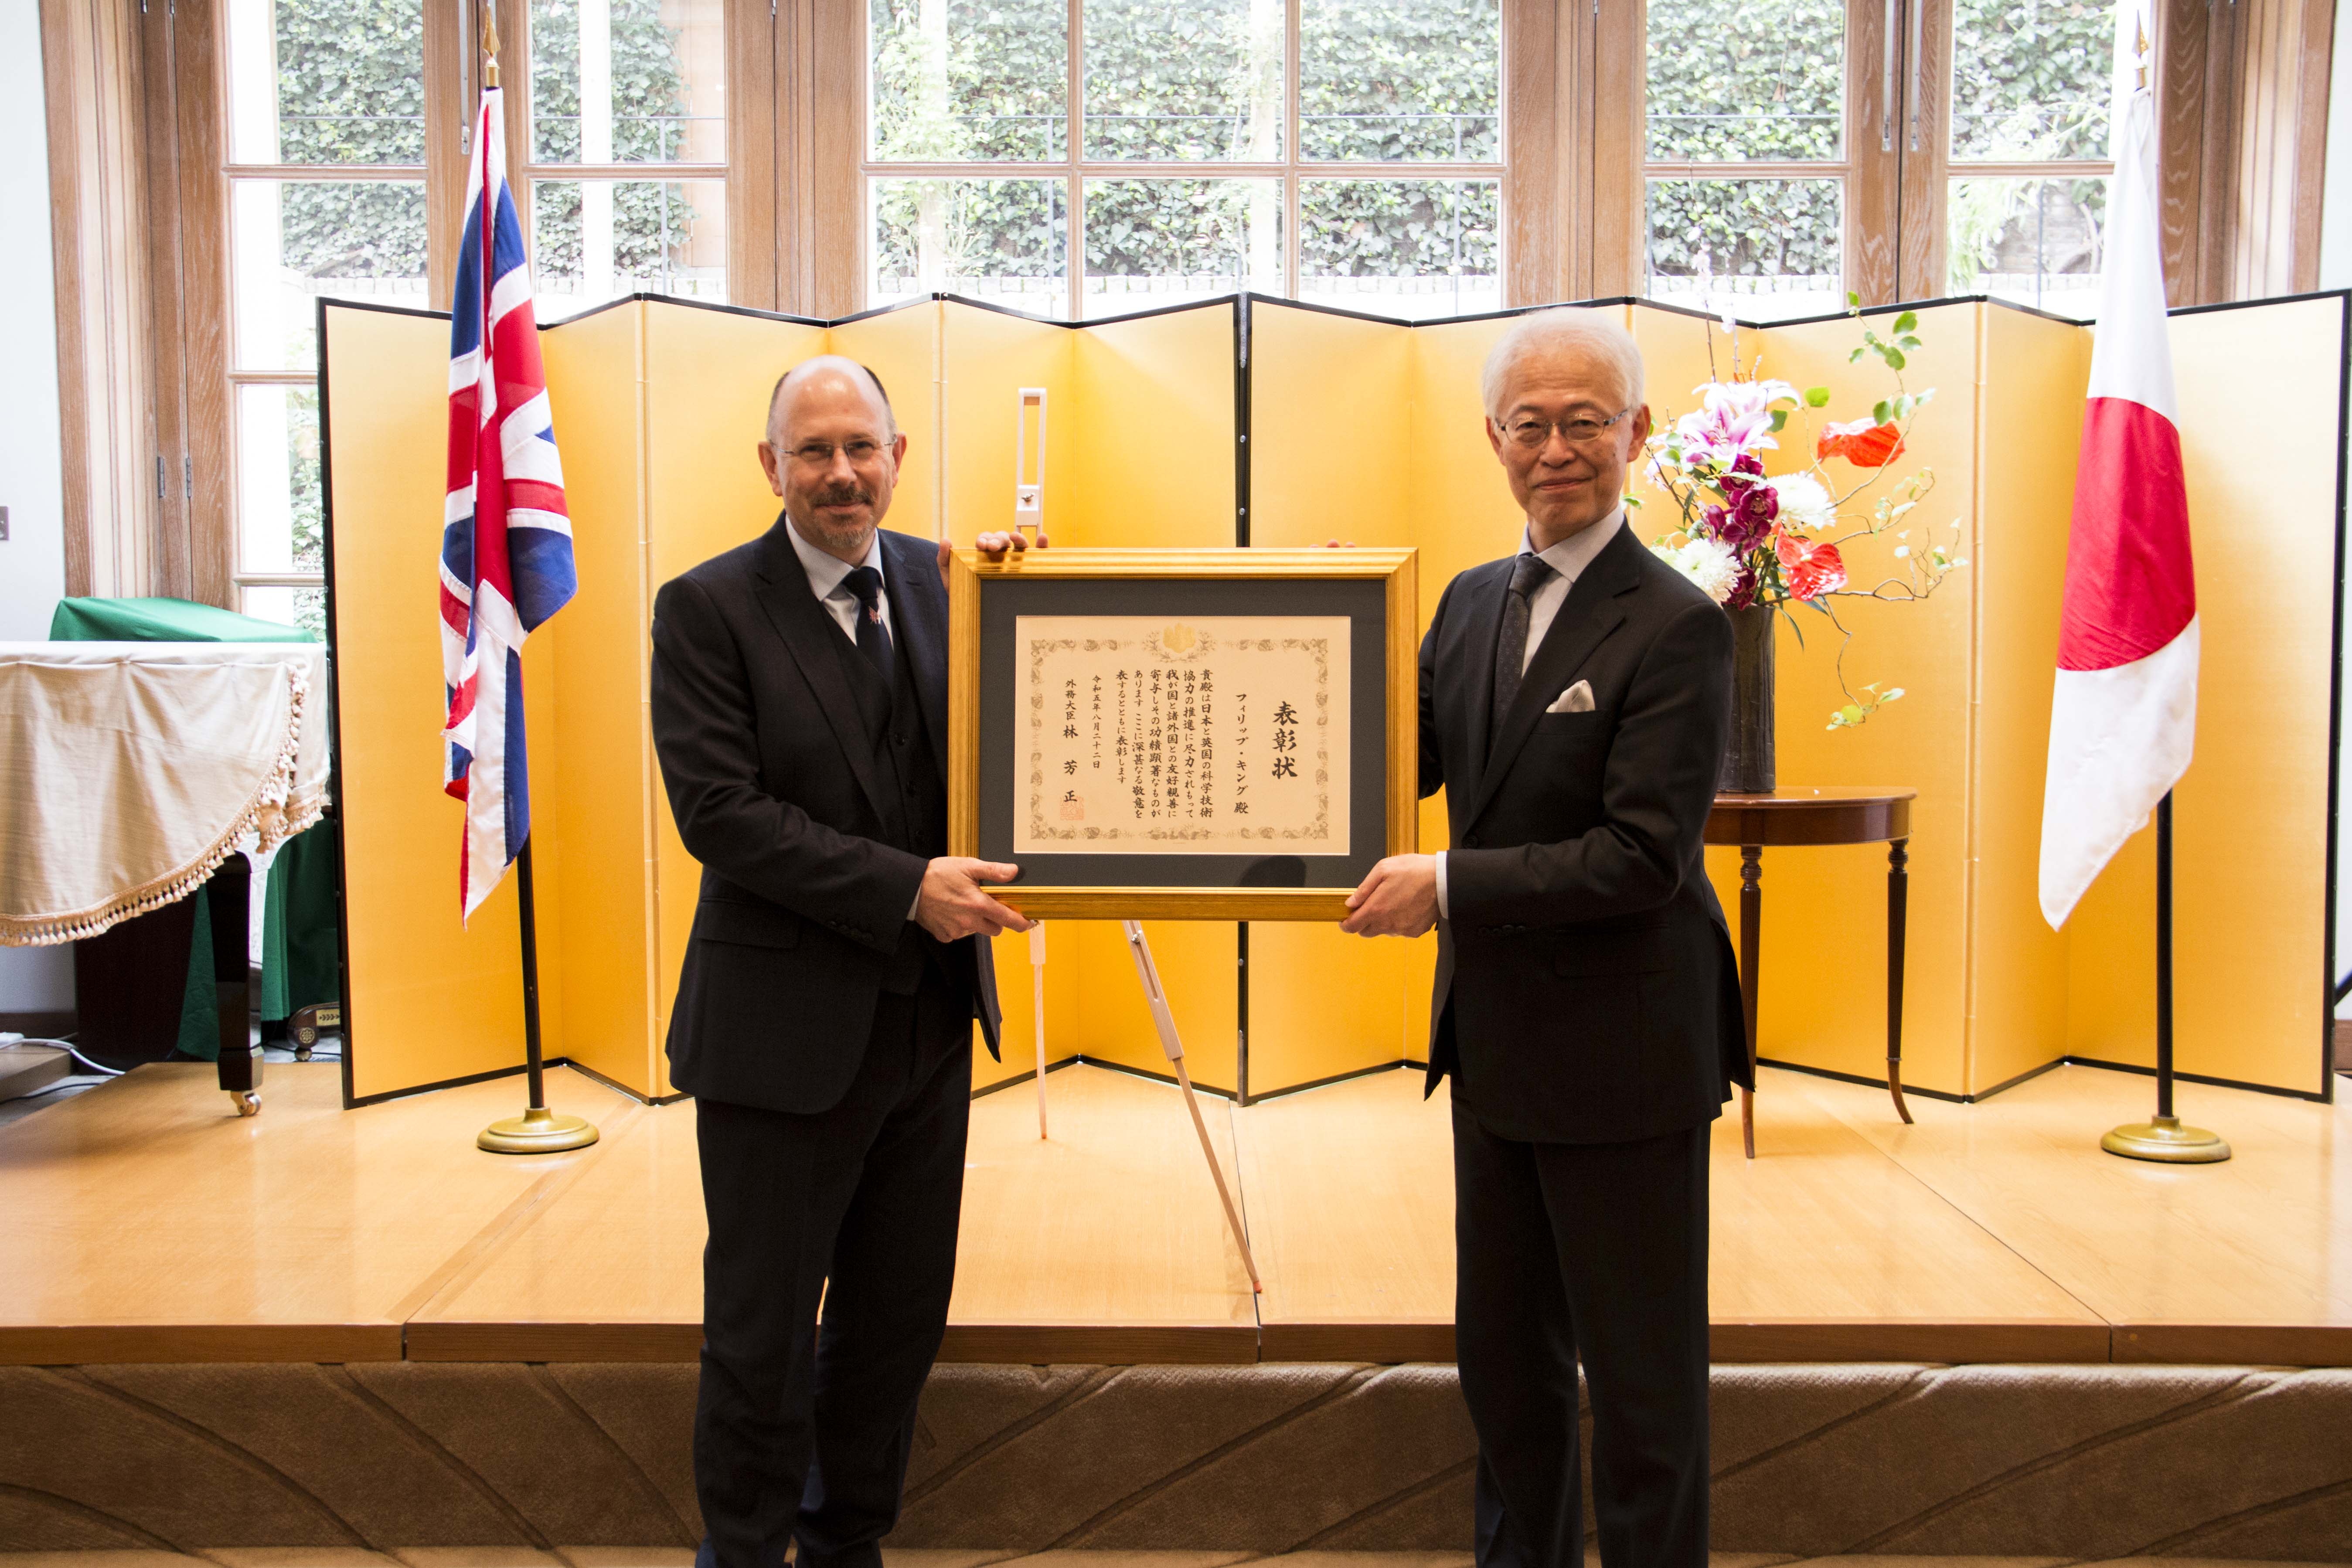 Philip King receives Foreign Minister's Commendation from Japanese Ambassador.the UK. The award is presented in a gold frame.